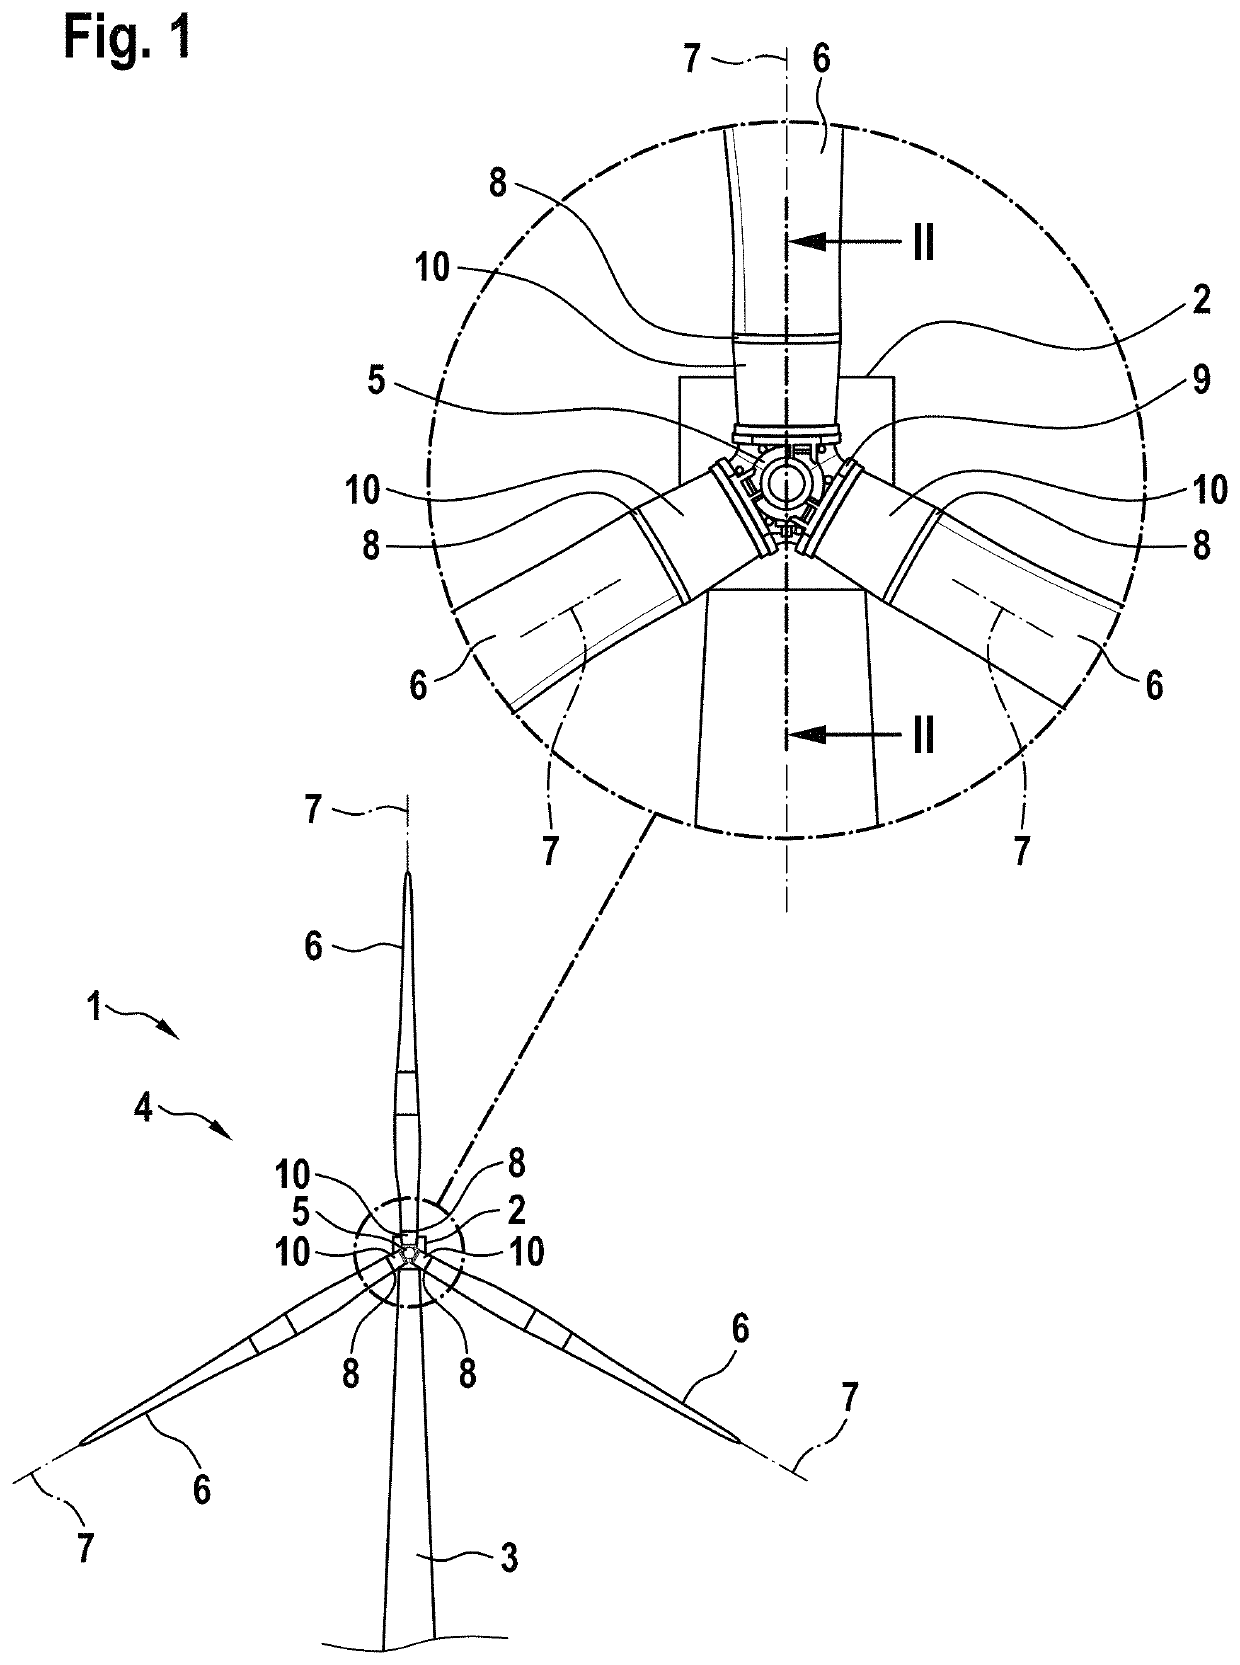 Blade adapter for wind turbines